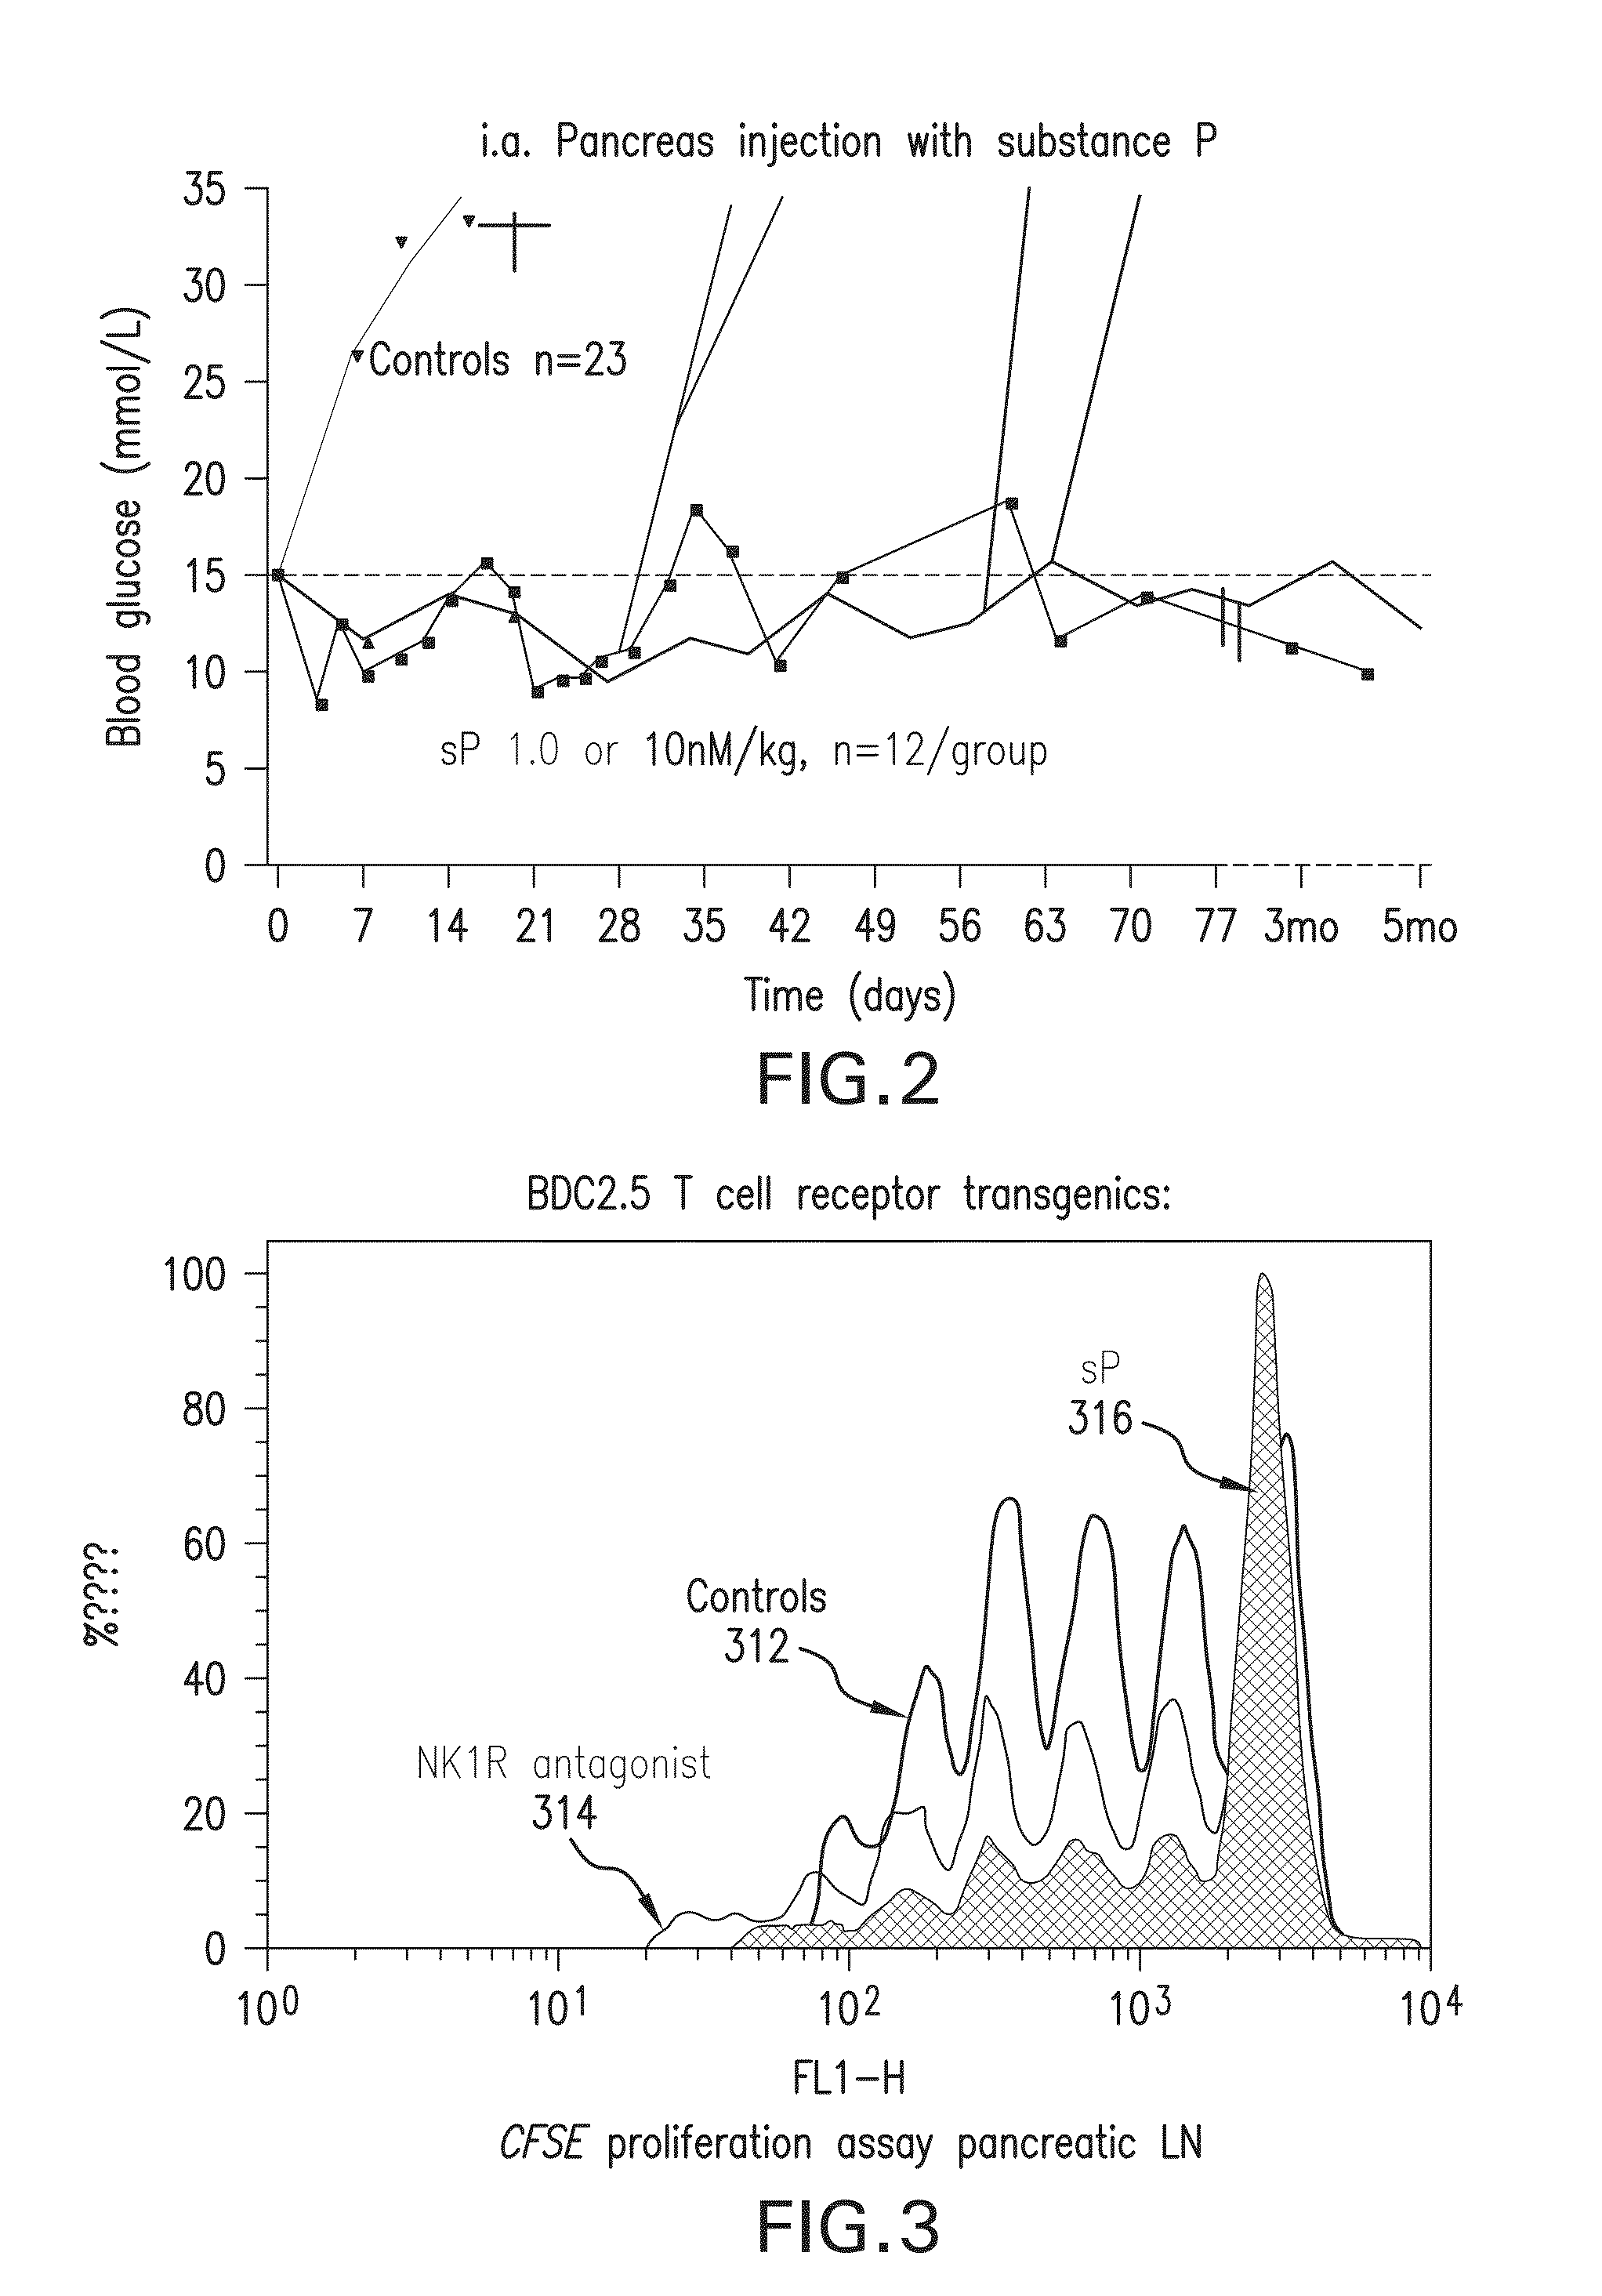 METHOD FOR REVERSING RECENT-ONSET TYPE 1 DIABETES (T1D) BY ADMINISTERING SUBSTANCE P (sP)